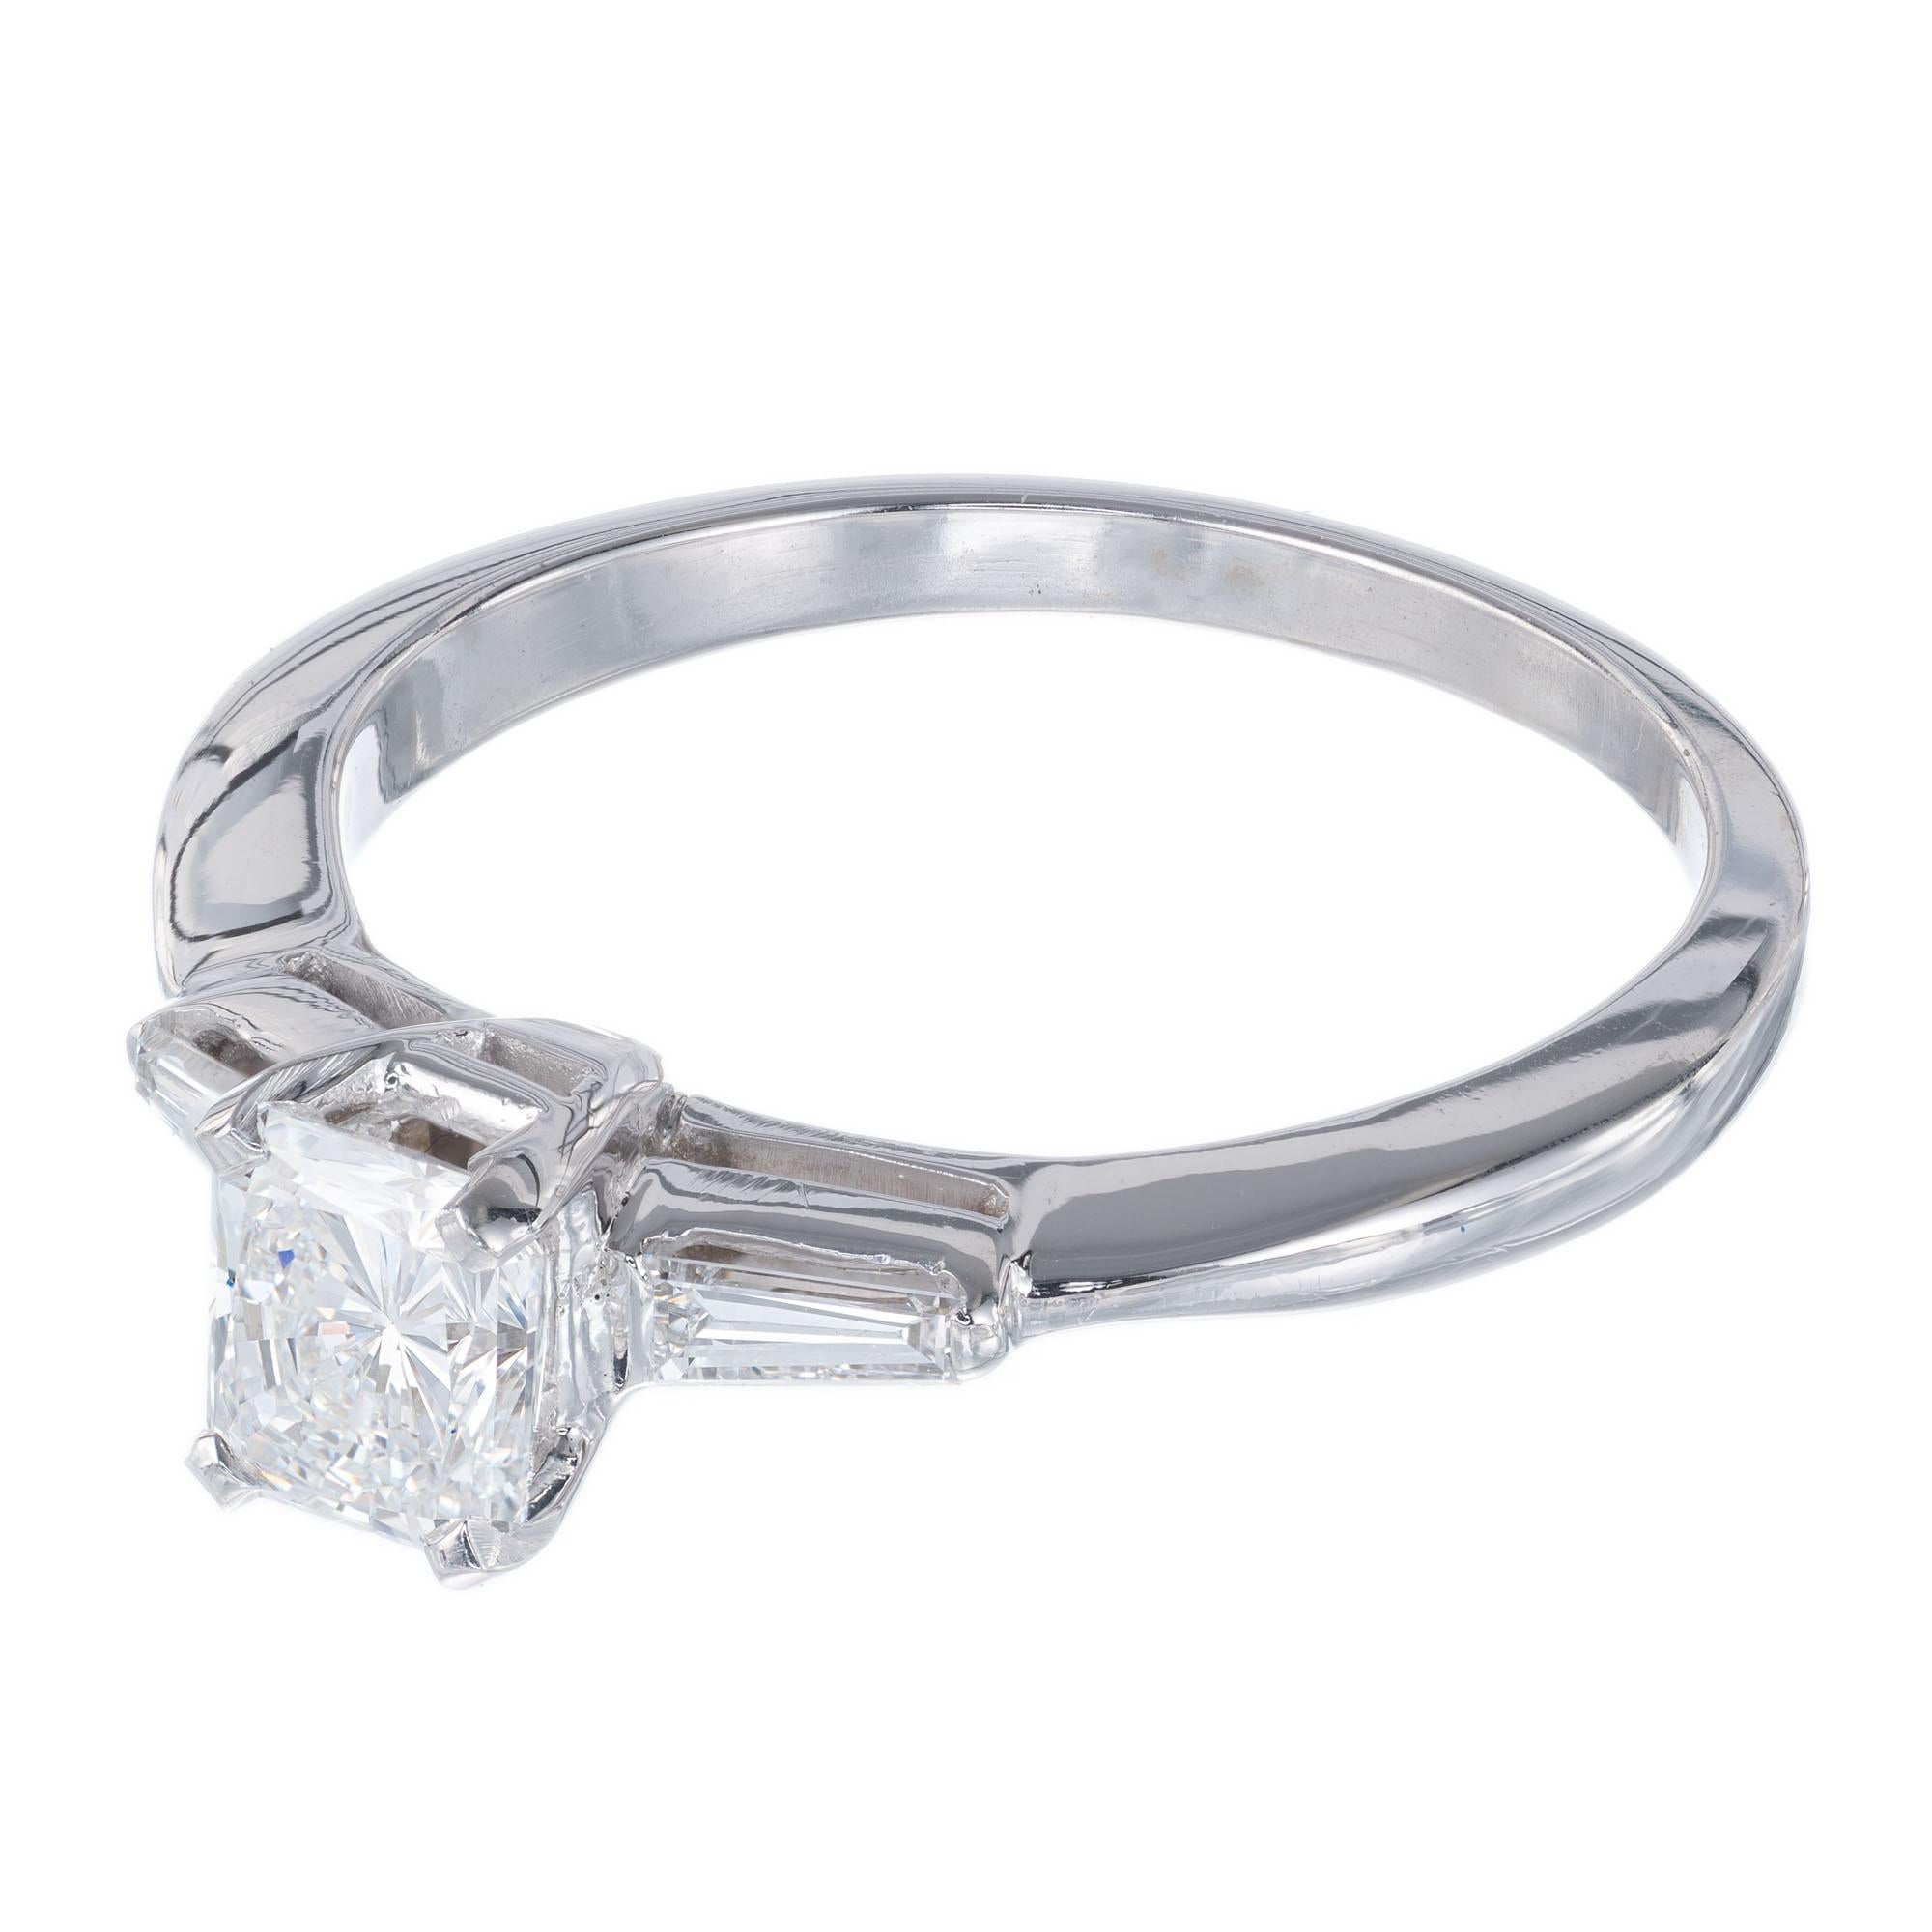 Cushion cut diamond engagement ring. EGL certified .65cts center stone in a 14k white gold three stone setting with 2 baguette side diamonds. 

1 Cushion cut .65ct diamond F to G color and SI2 clarity,  EGL certificate# US65285401D
2 tapered